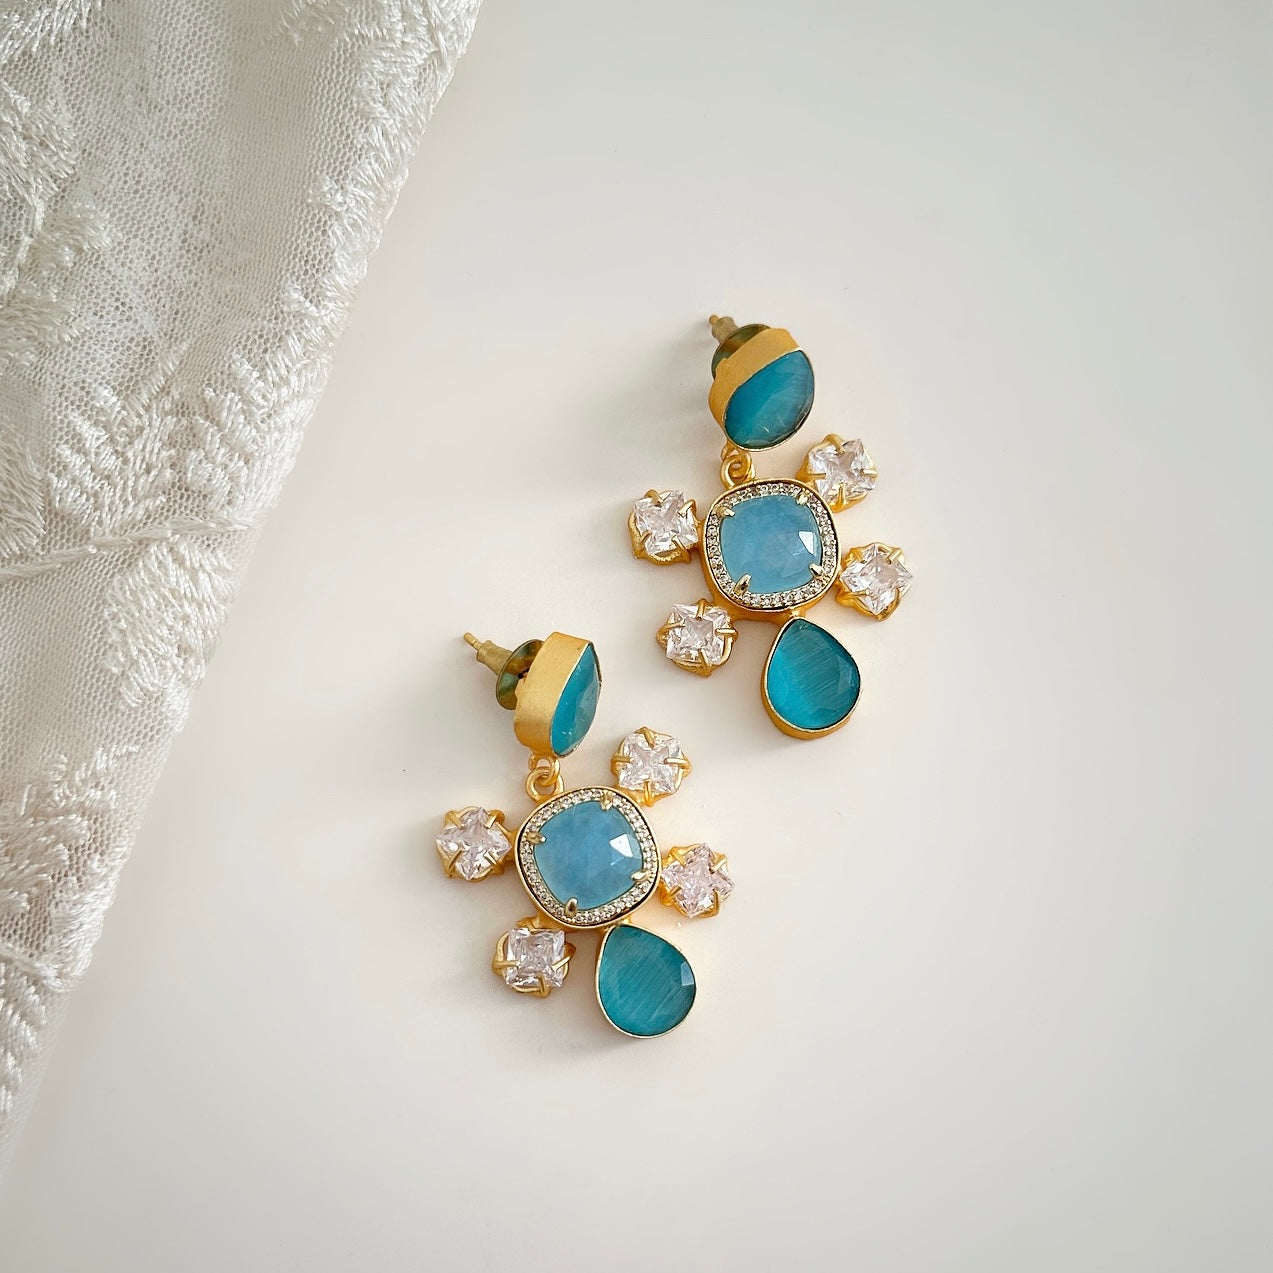 The Rosie Blue Drop Earrings are a luxurious addition to any jewelry collection. Adorned with luminous blue gemstones and sparkling cz crystals, these earrings exude elegance and sophistication. Elevate your style with these exquisite, exclusive pieces.